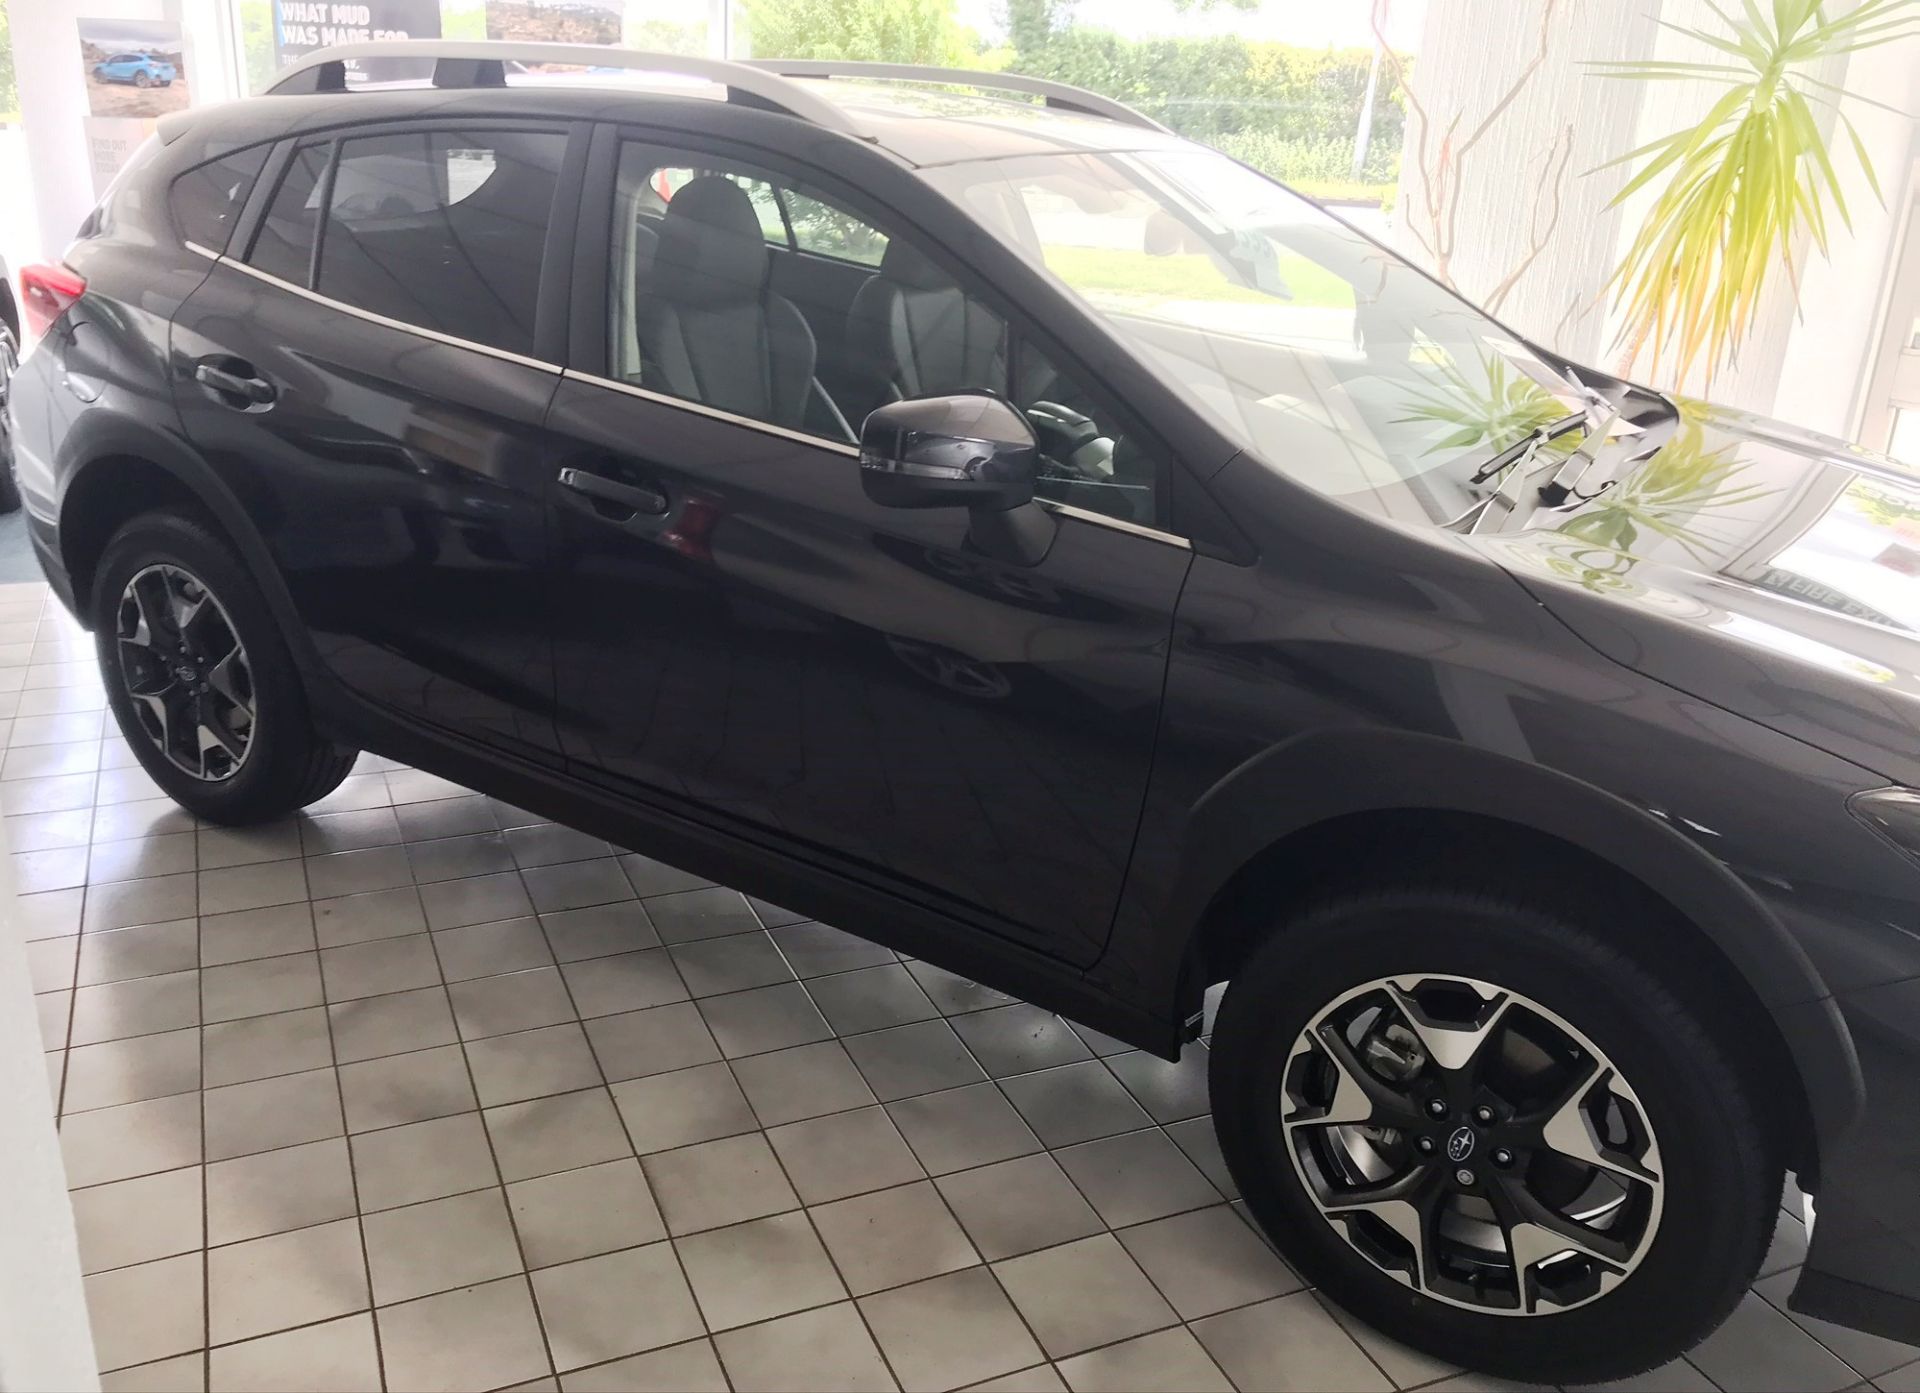 Subaru XV 1.6i SE Premium Lineartronic 4WD (s/s) 5dr | Delivery Mileage: 10 | Reg: DG20 BYY | Foreco - Image 2 of 14